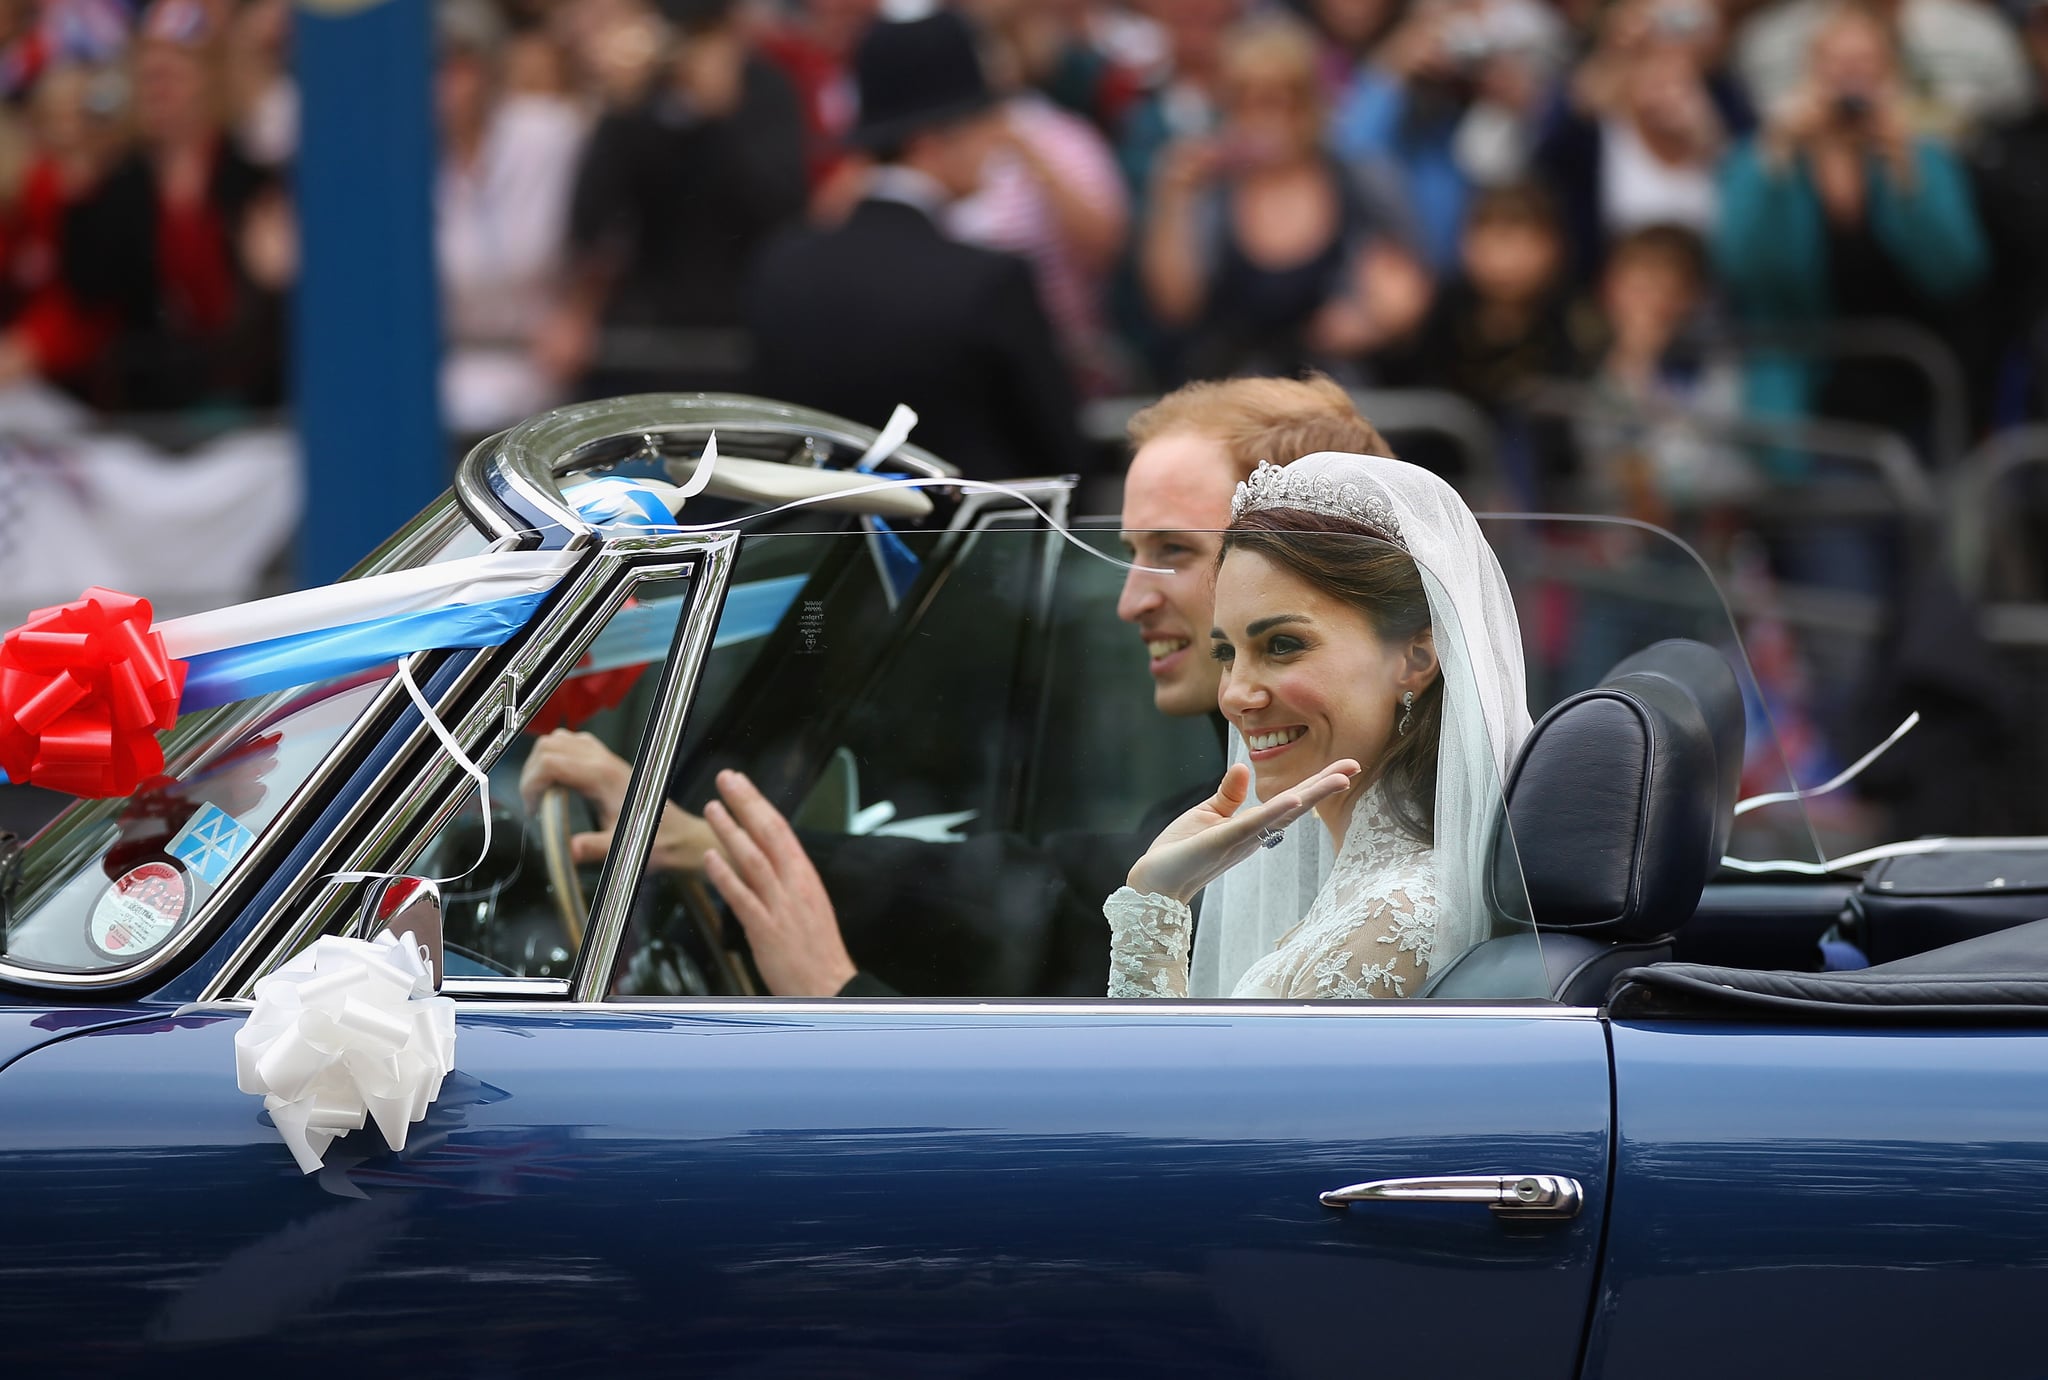 LONDON, ENGLAND - APRIL 29:  Prince William, Duke of Cambridge and Catherine, Duchess of Cambridge drive from Buckingham Palace in a decorated sports car on April 29, 2011 in London, England. The marriage of the second in line to the British throne was led by the Archbishop of Canterbury and was attended by 1900 guests, including foreign Royal family members and heads of state. Thousands of well-wishers from around the world have also flocked to London to witness the spectacle and pageantry of the Royal Wedding.    (Photo by Jeff J Mitchell/Getty Images)